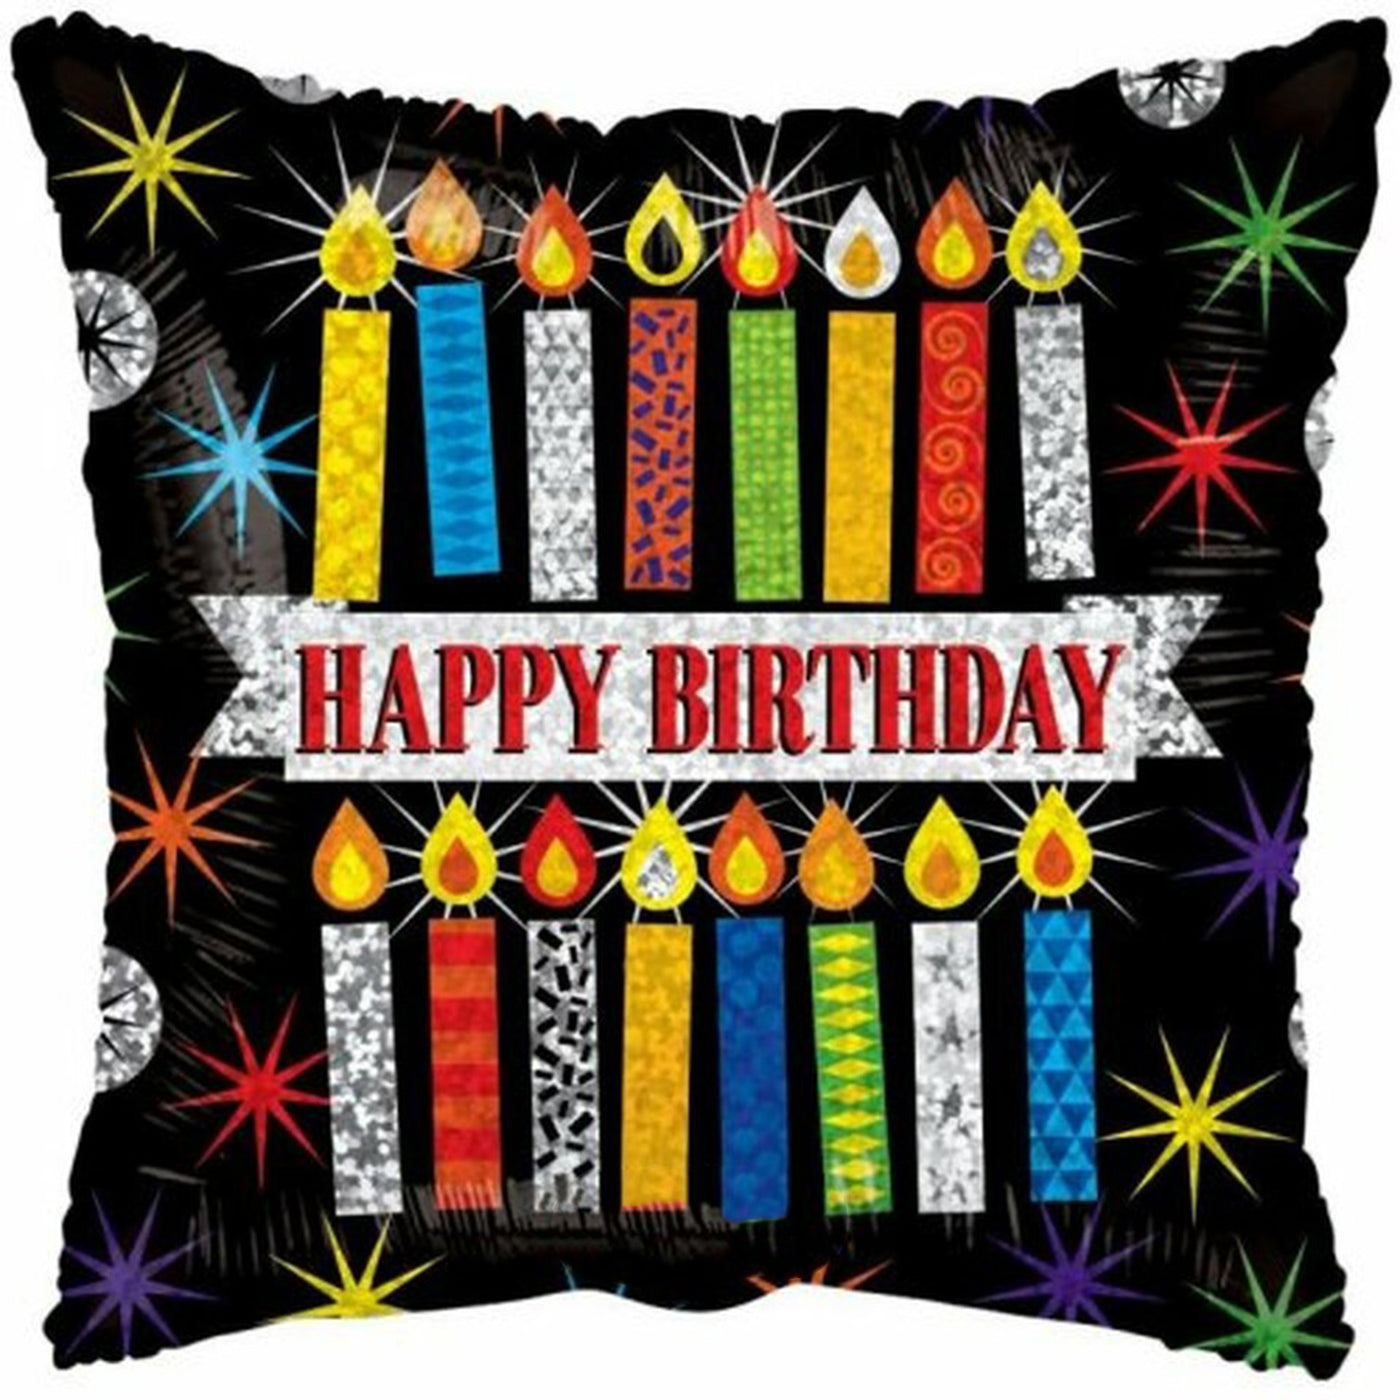 Patterned Birthday Candles Balloon